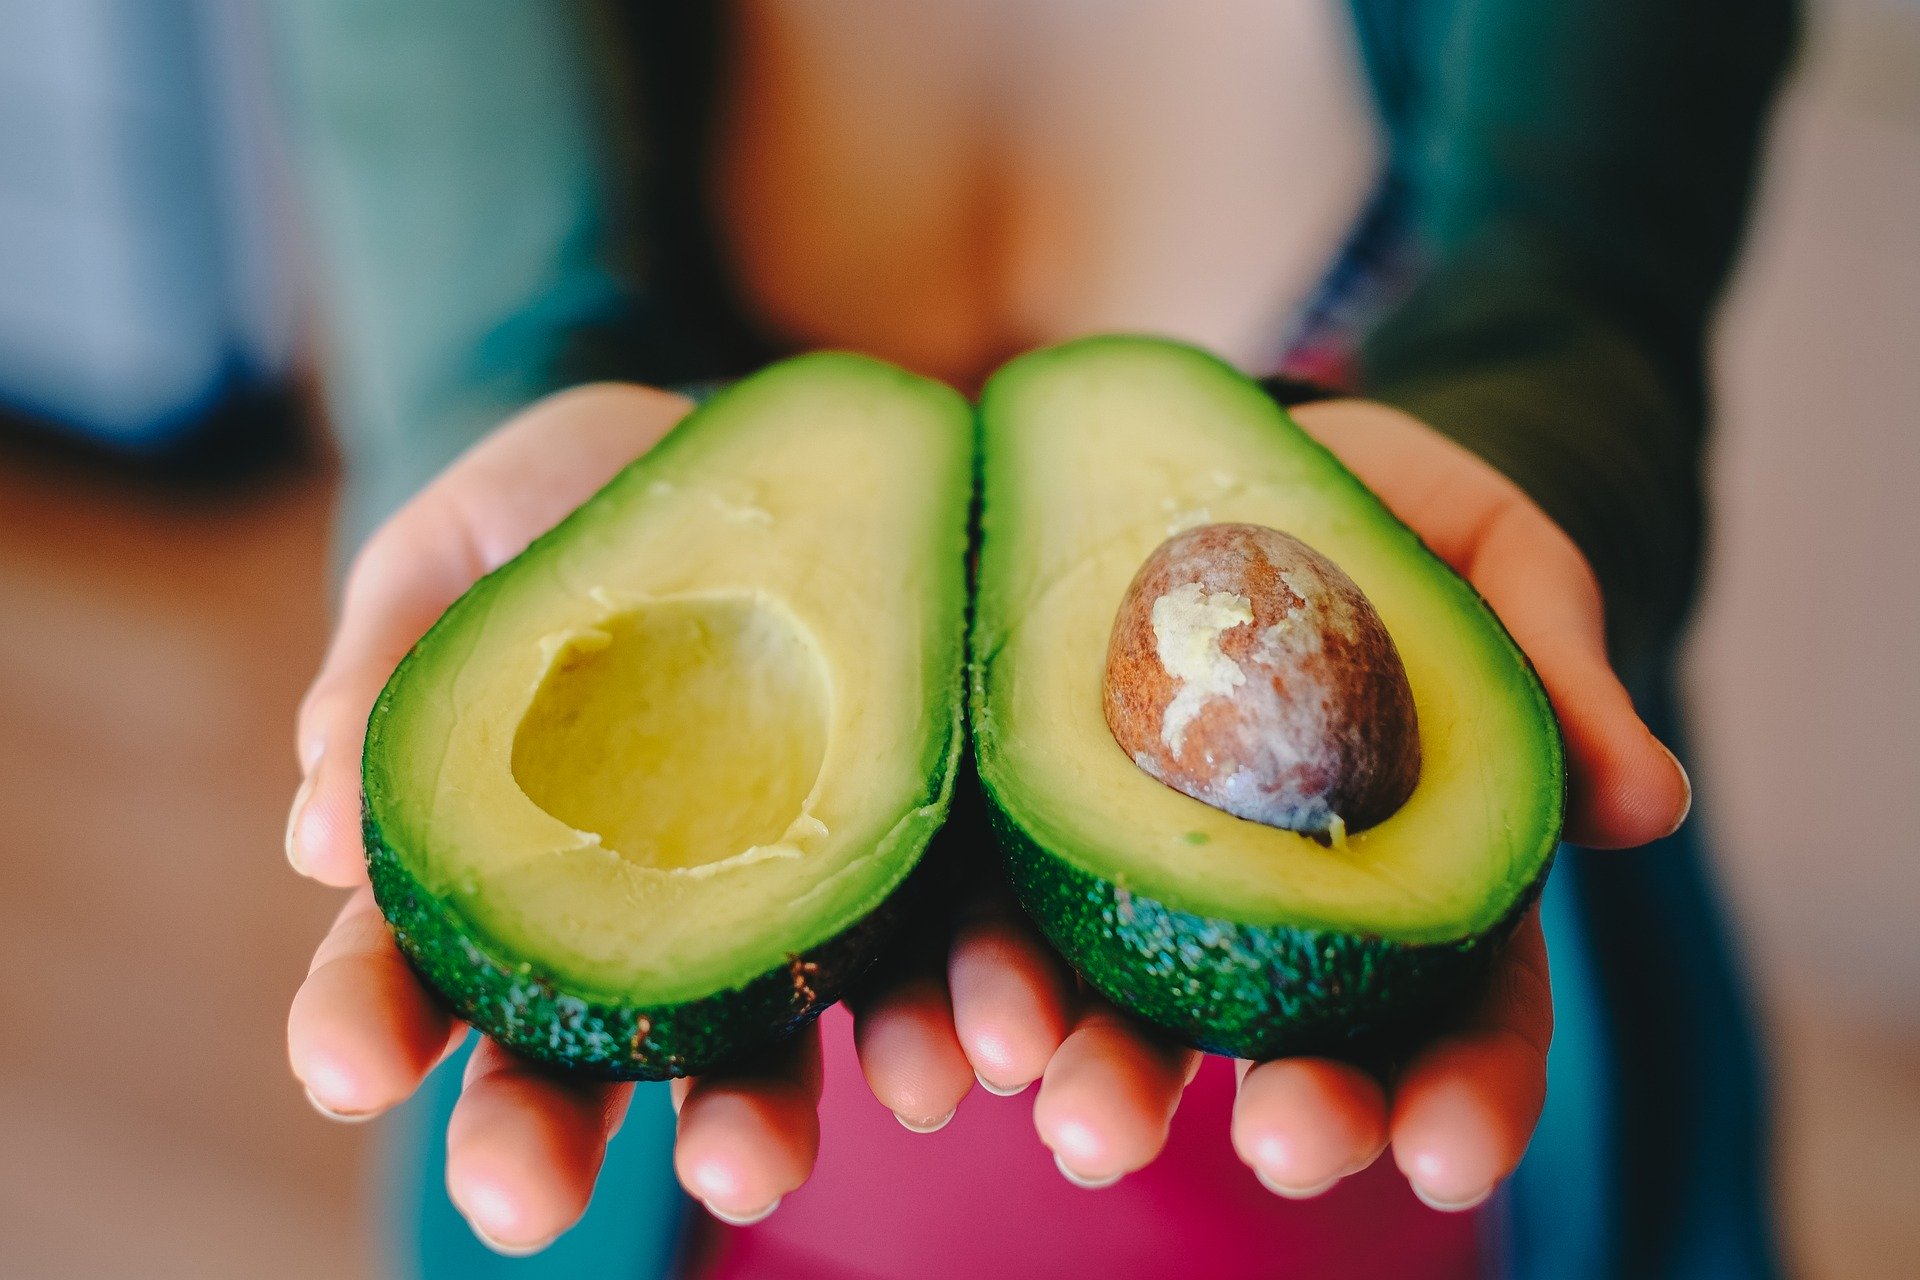 Fat in avocados reduces insulin resistance